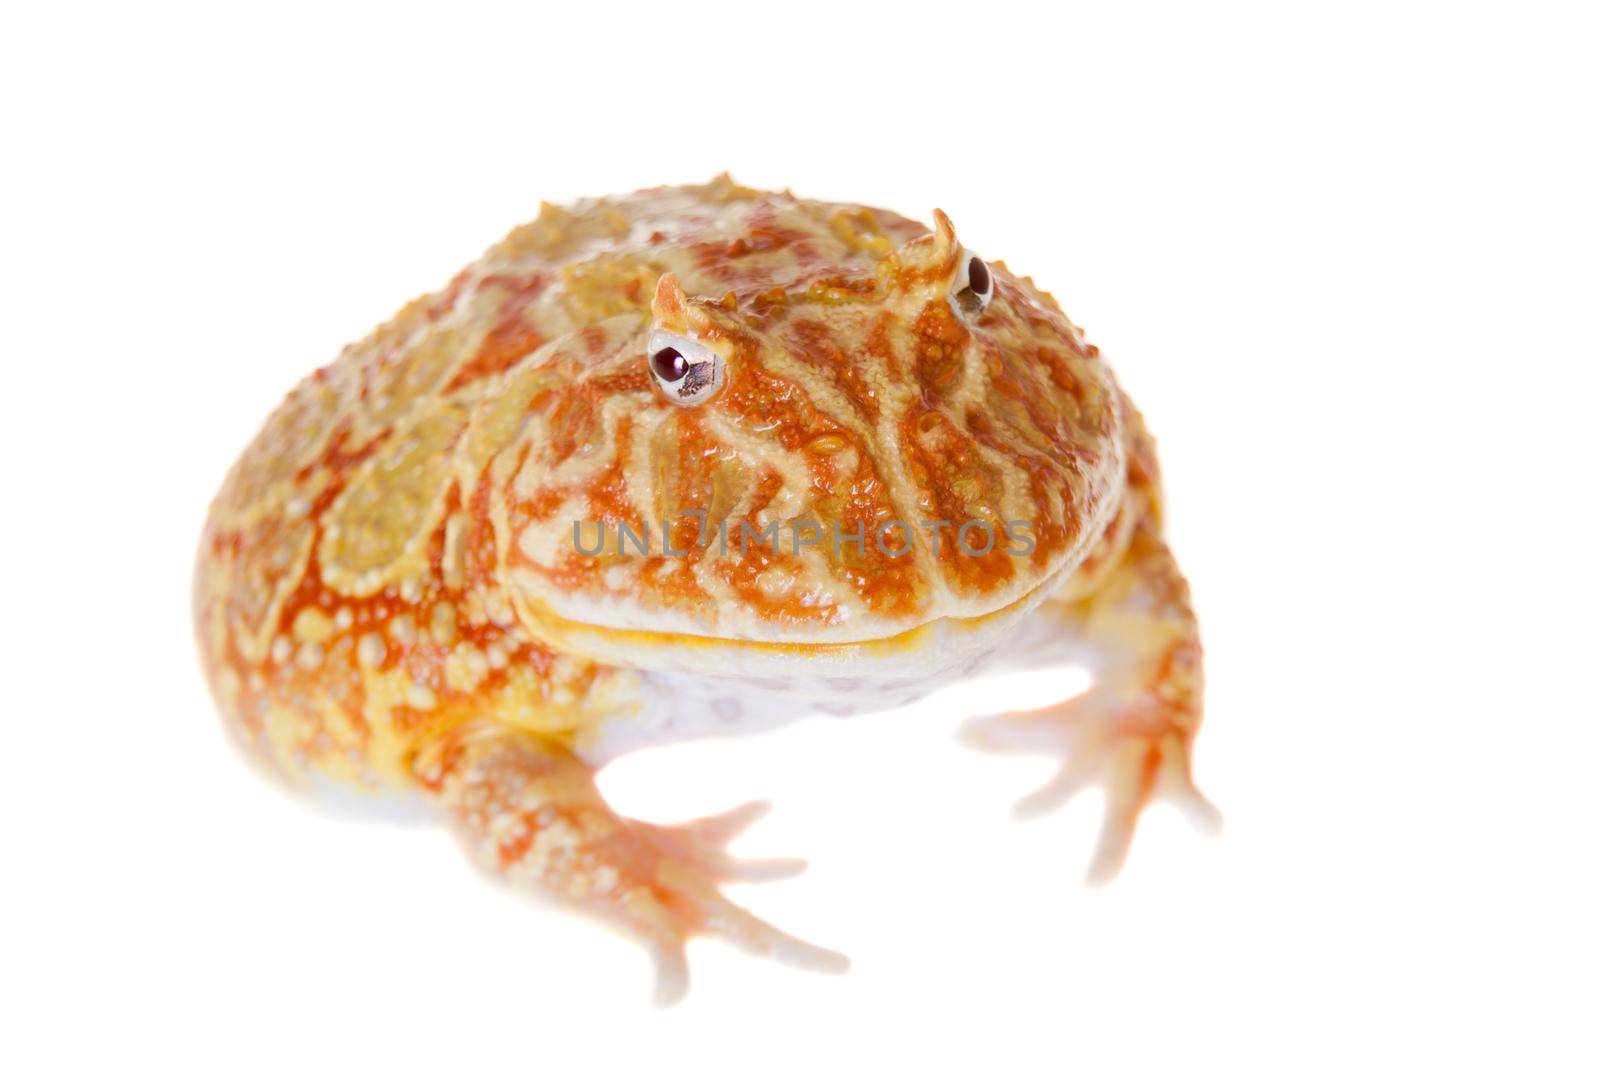 The chachoan horned frog, Ceratophrys cranwelli, isolated on white background